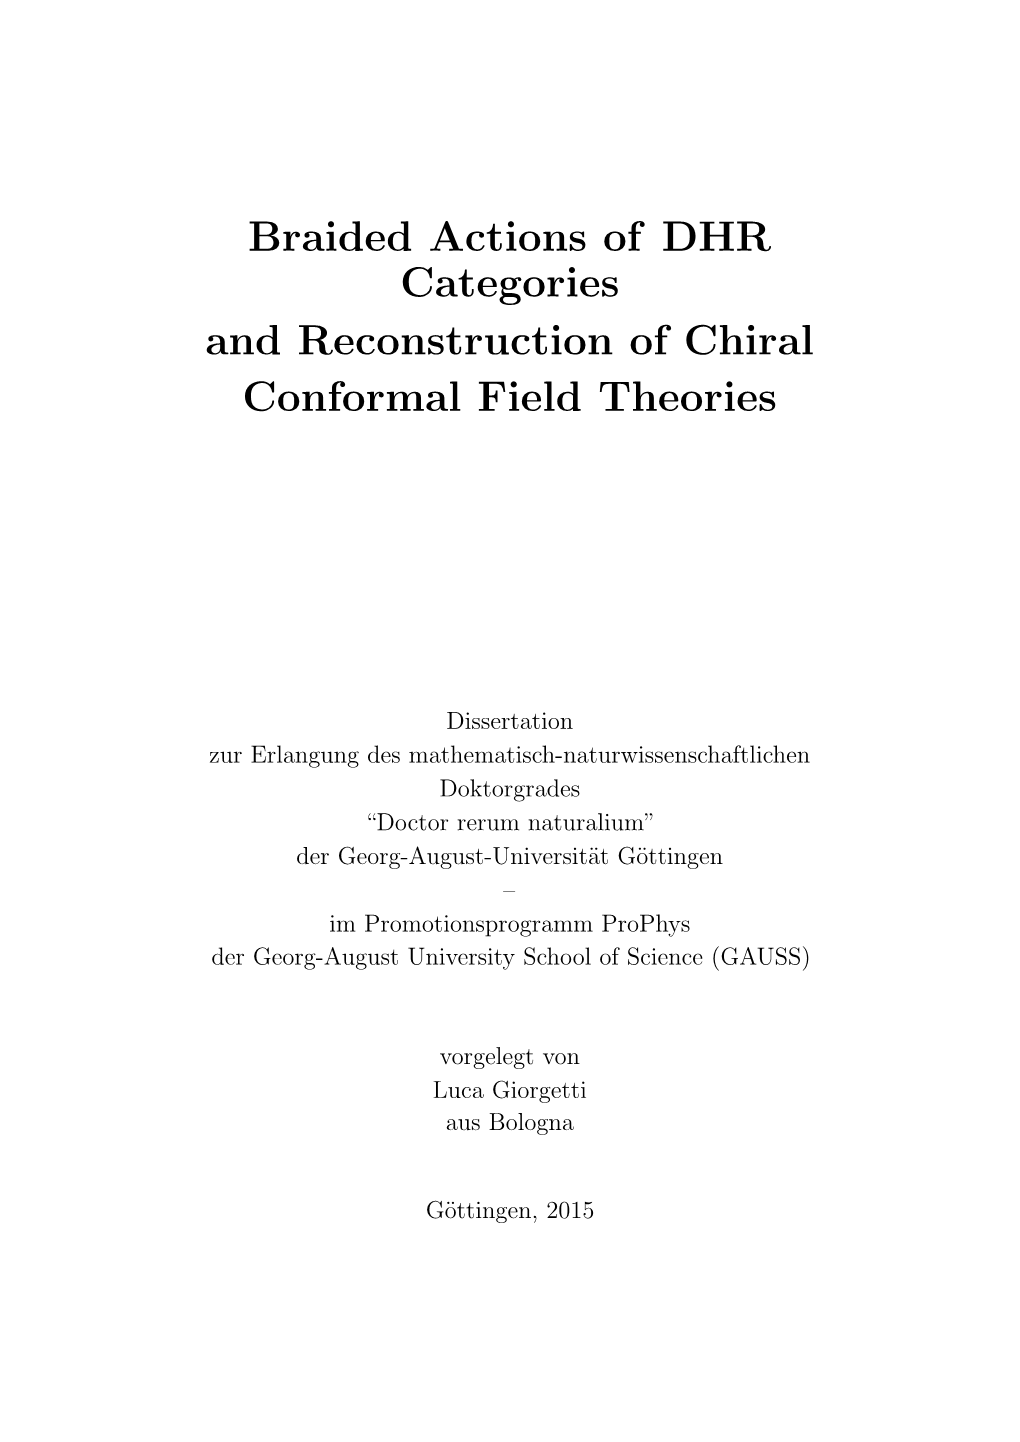 Braided Actions of DHR Categories and Reconstruction of Chiral Conformal Field Theories